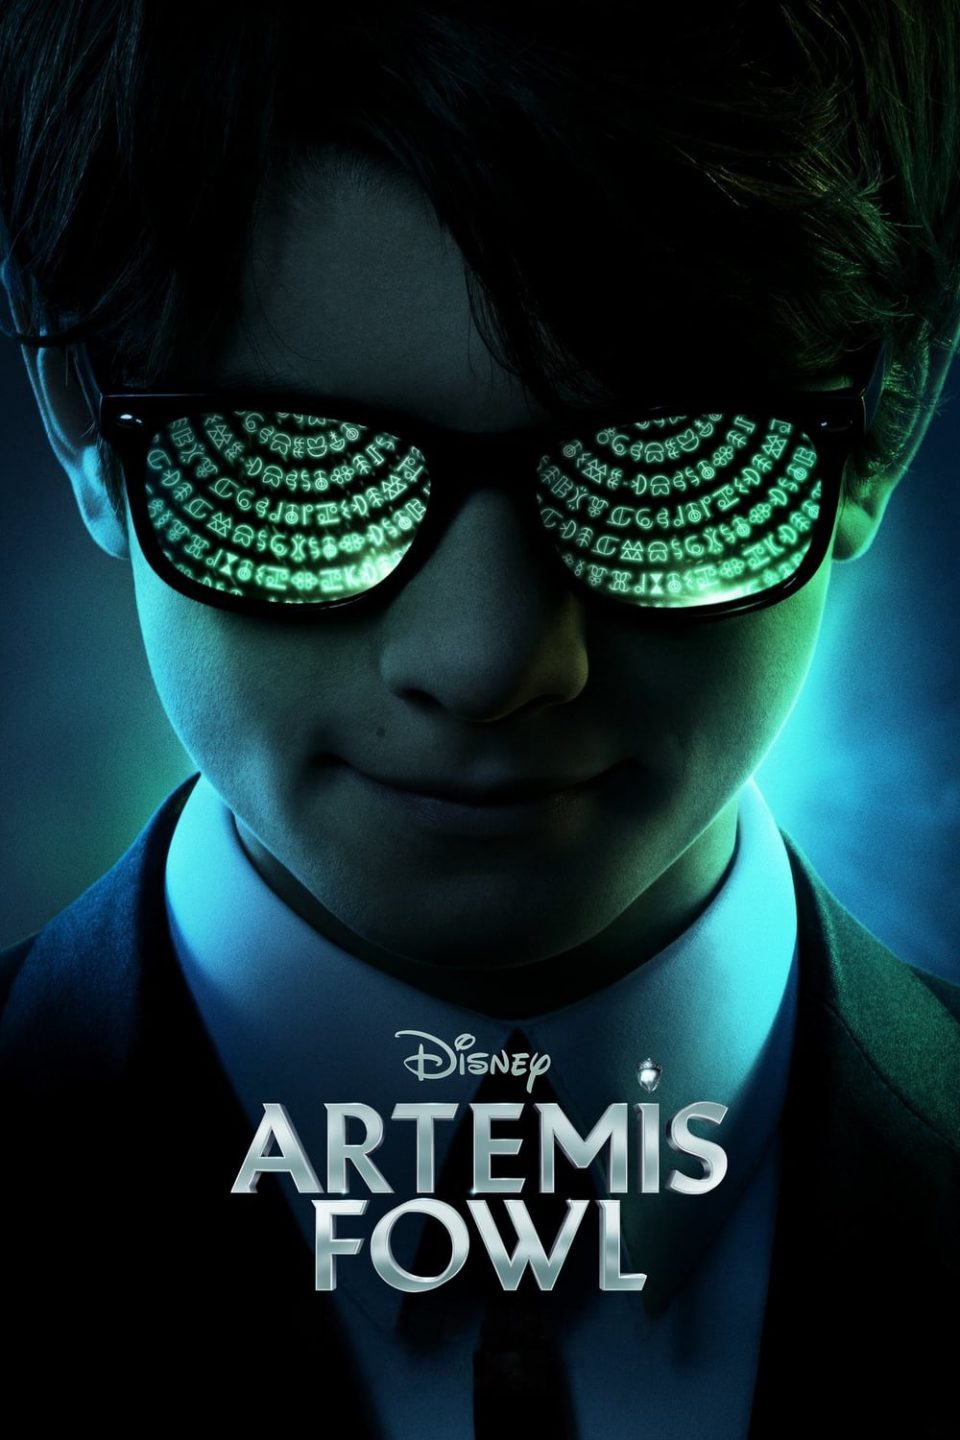 Poster for the movie "Artemis Fowl"